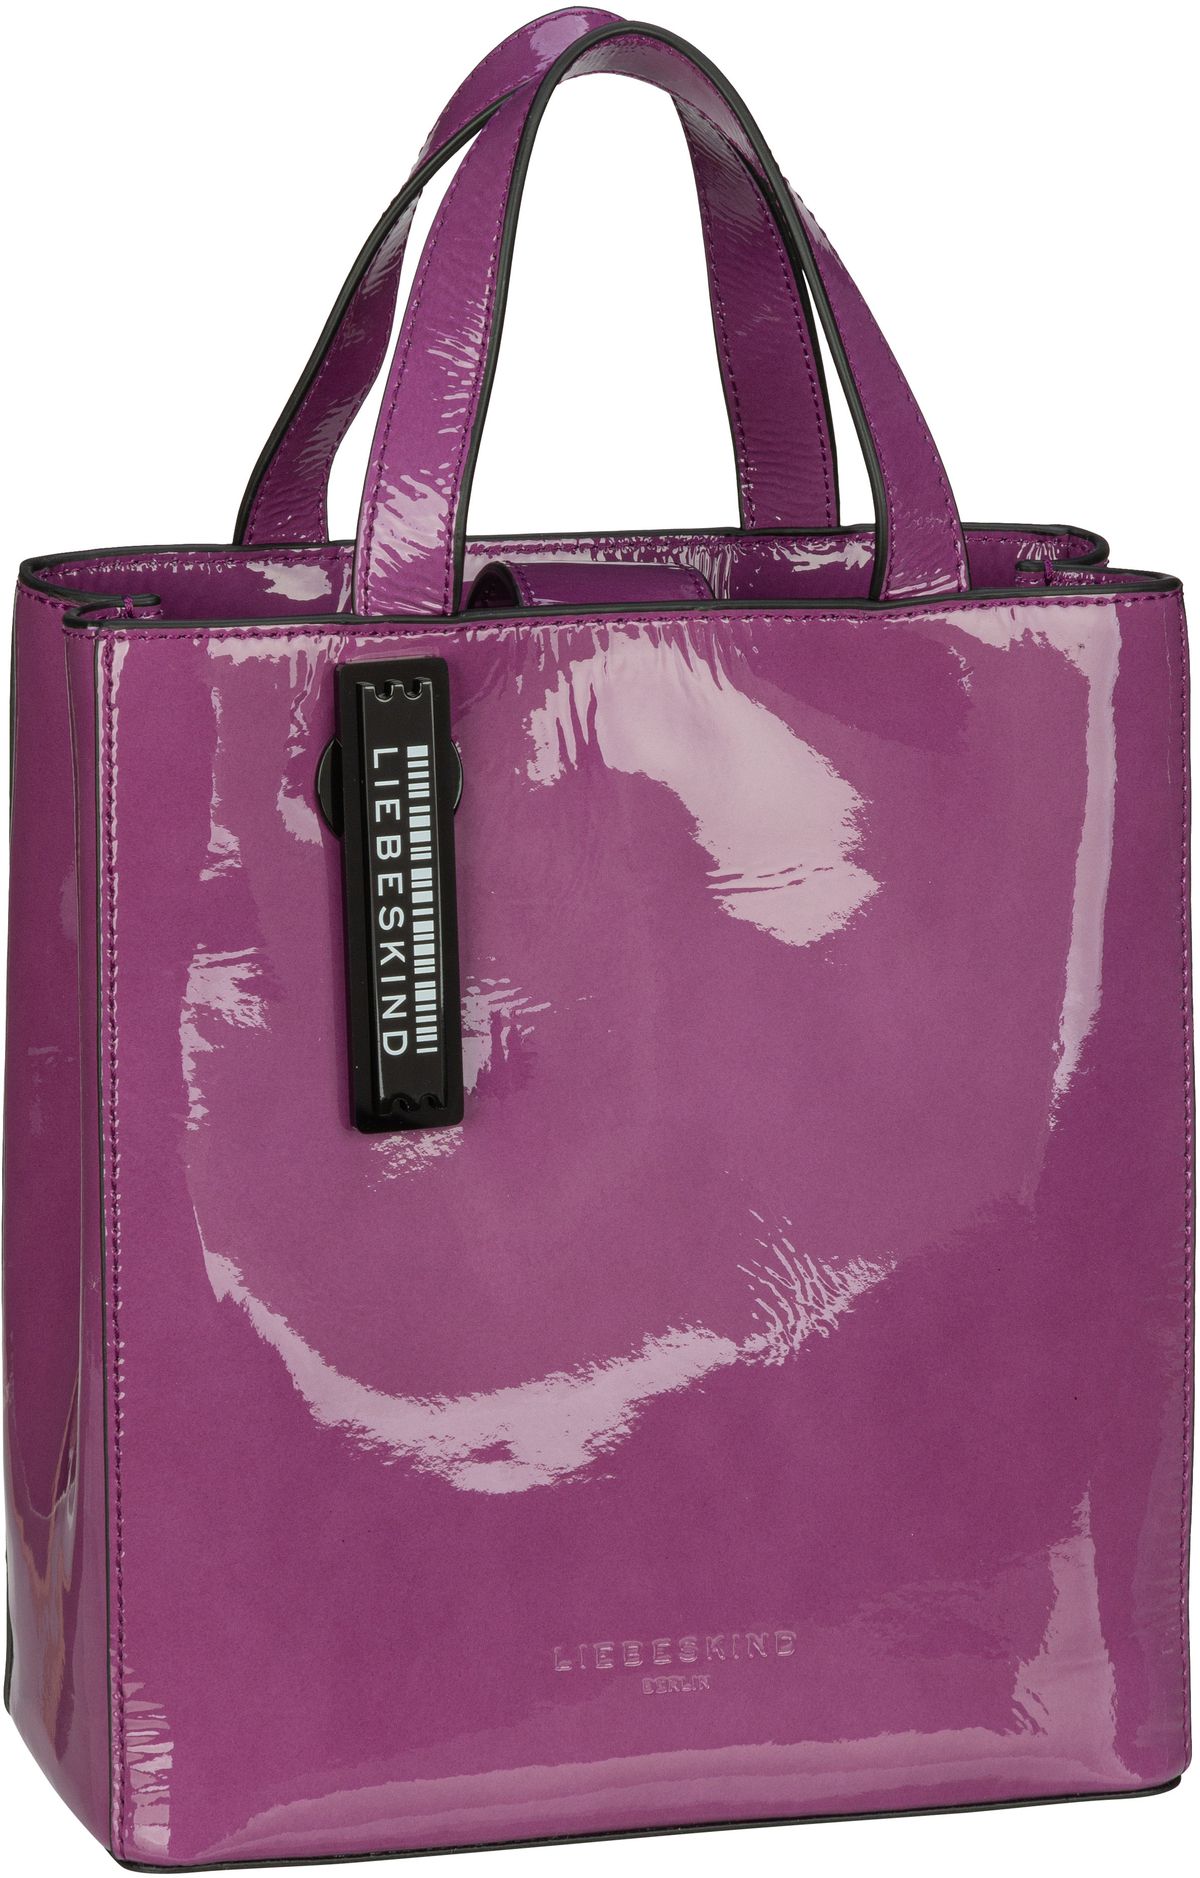 Liebeskind Berlin Paper Bag Naplack S - Neo Orchid